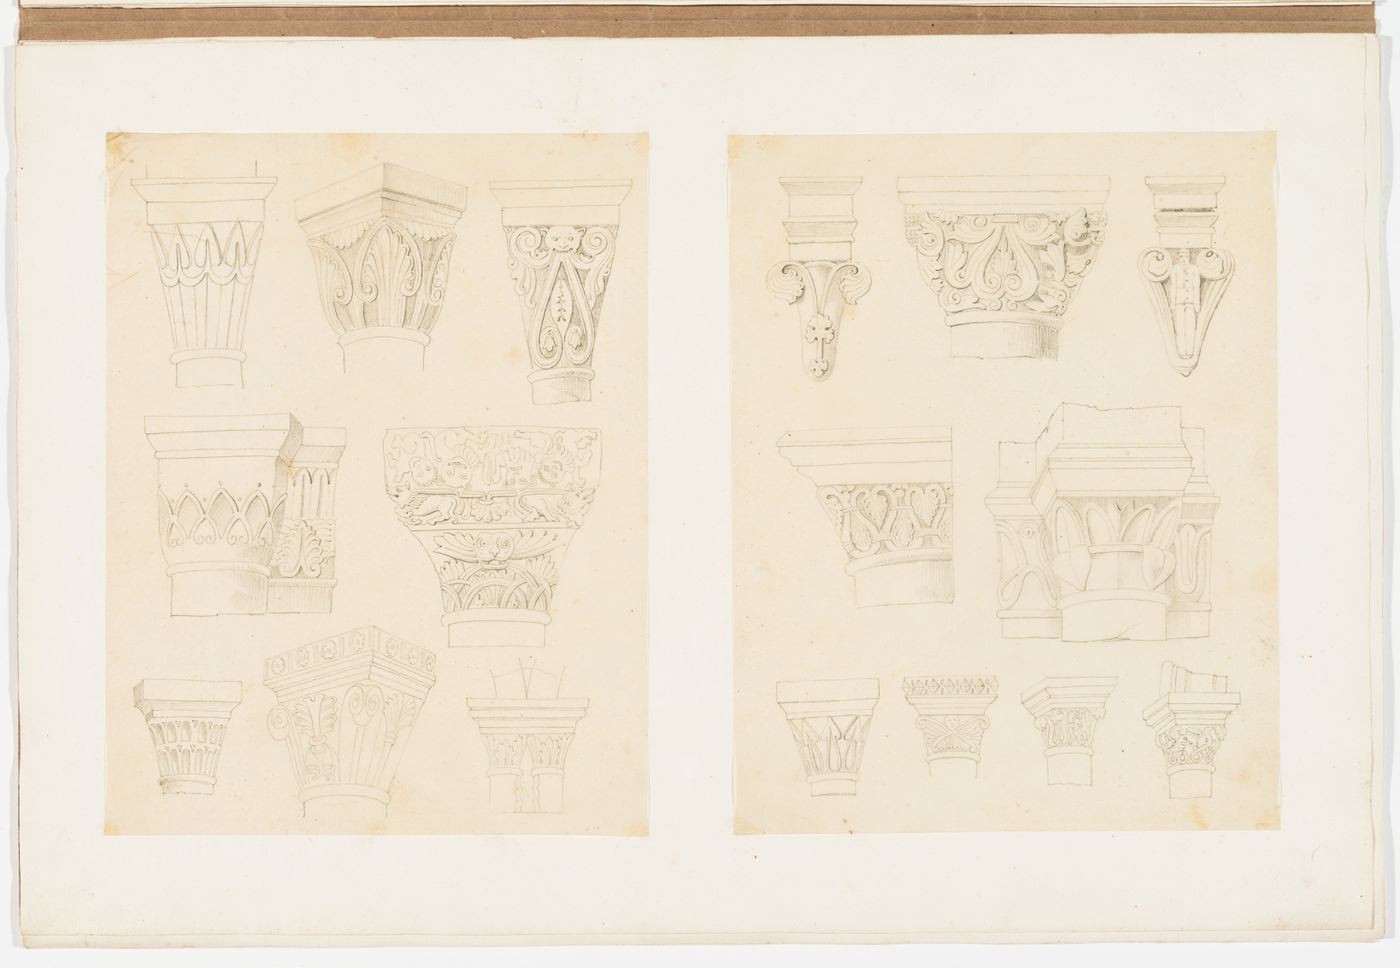 Two drawings of Gothic architectural elements: capitals, corbels and piers